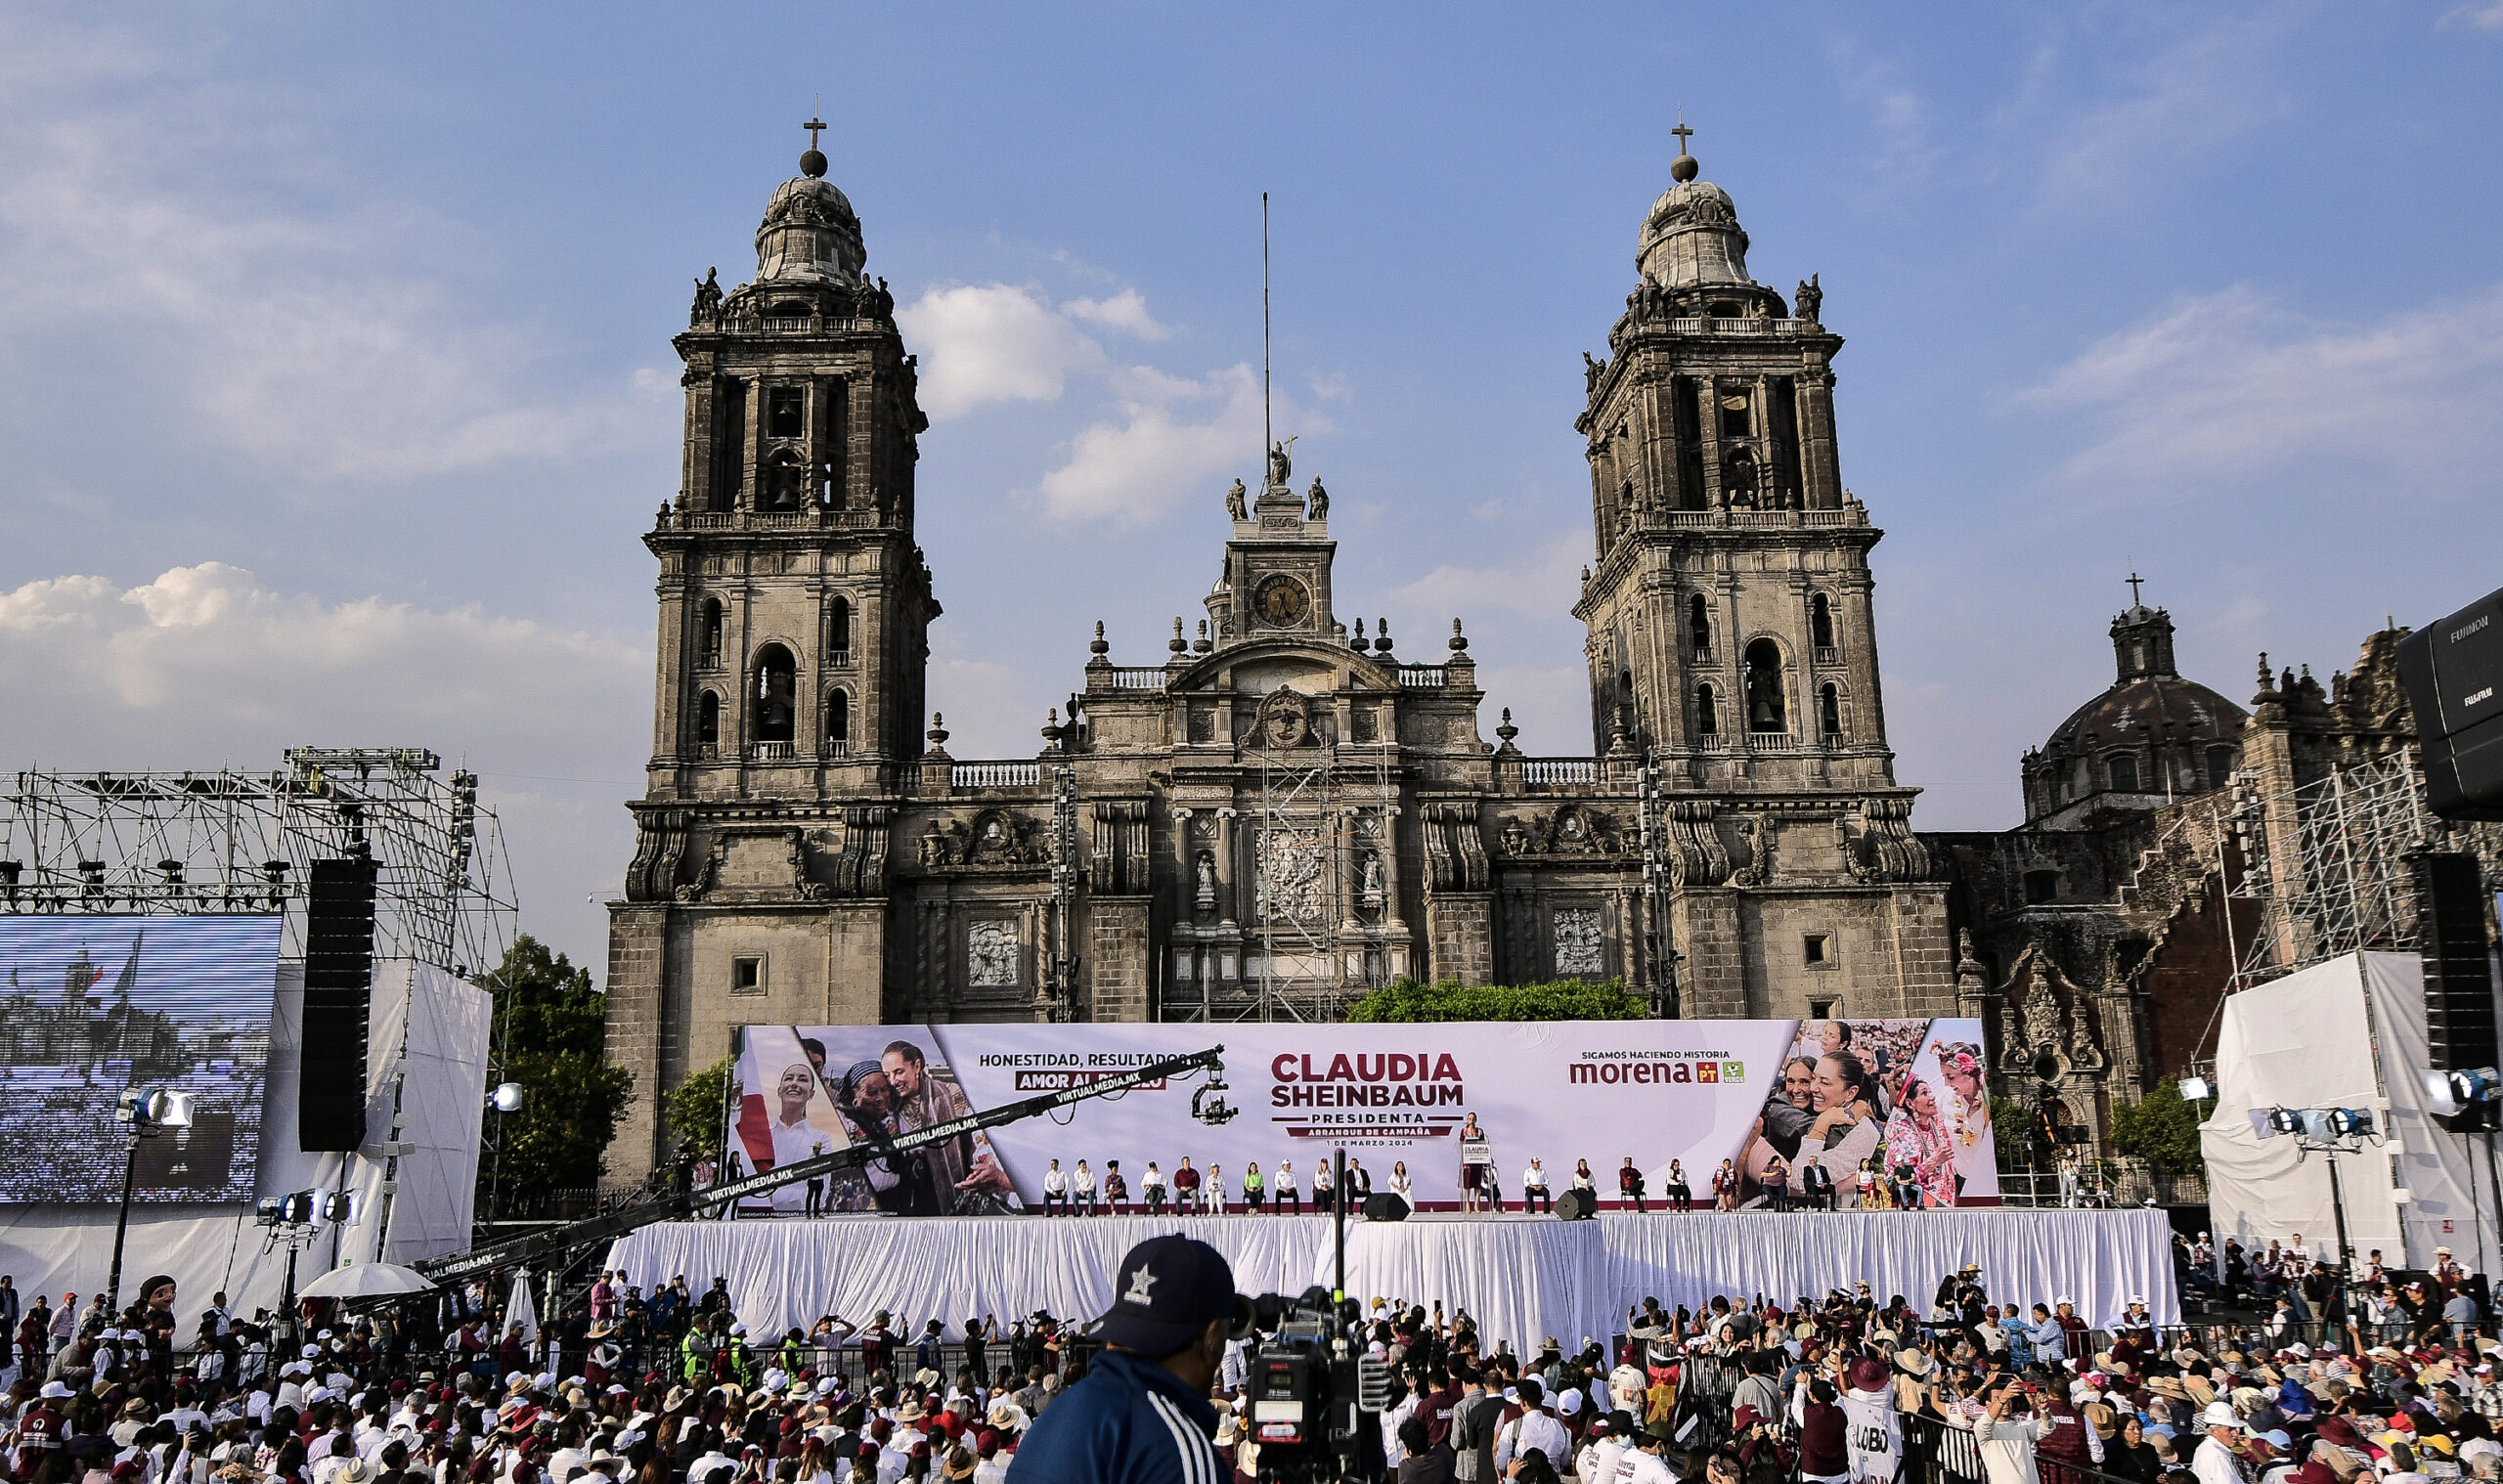 Sheinbaum’s Win Demonstrates the Left’s Lock on Mexican Populism